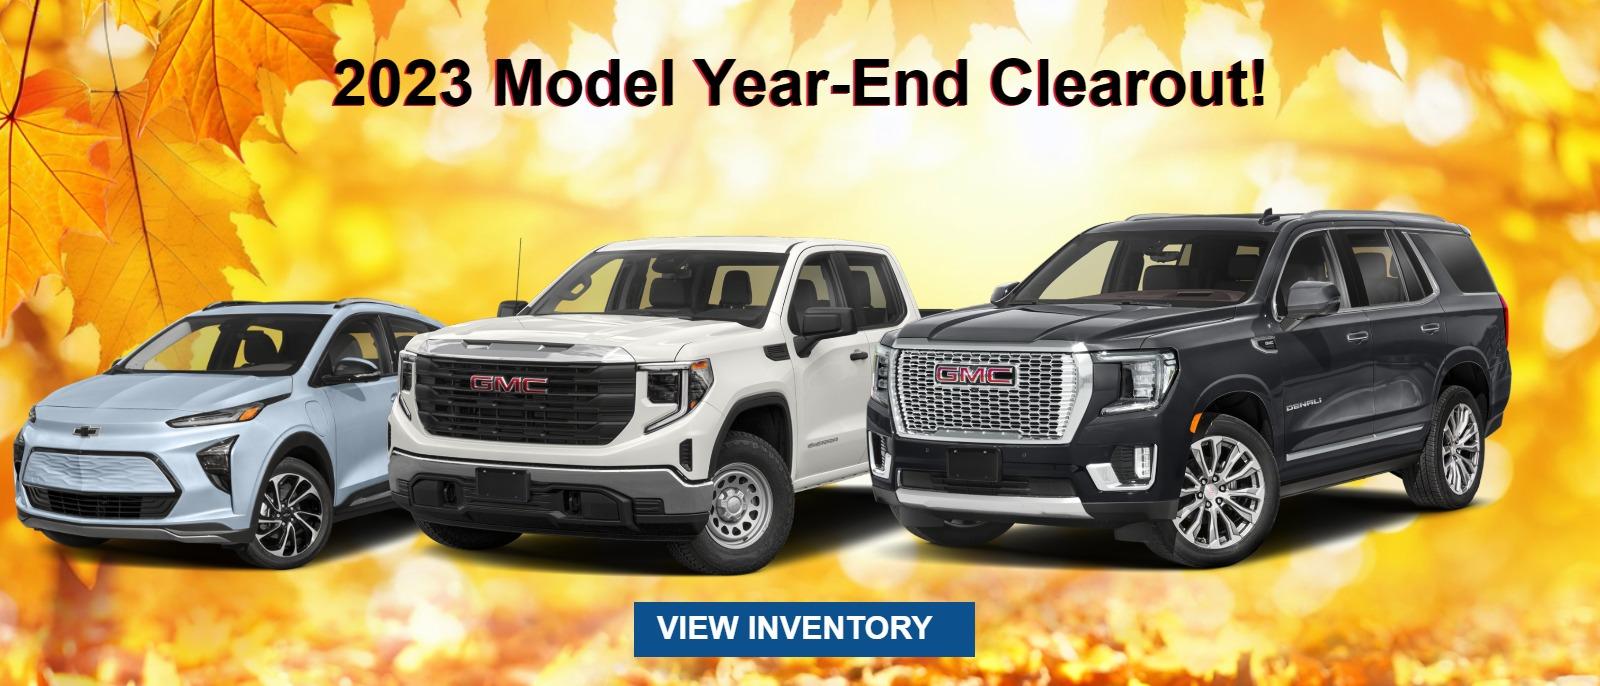 2023 Model Year-End Clearout!